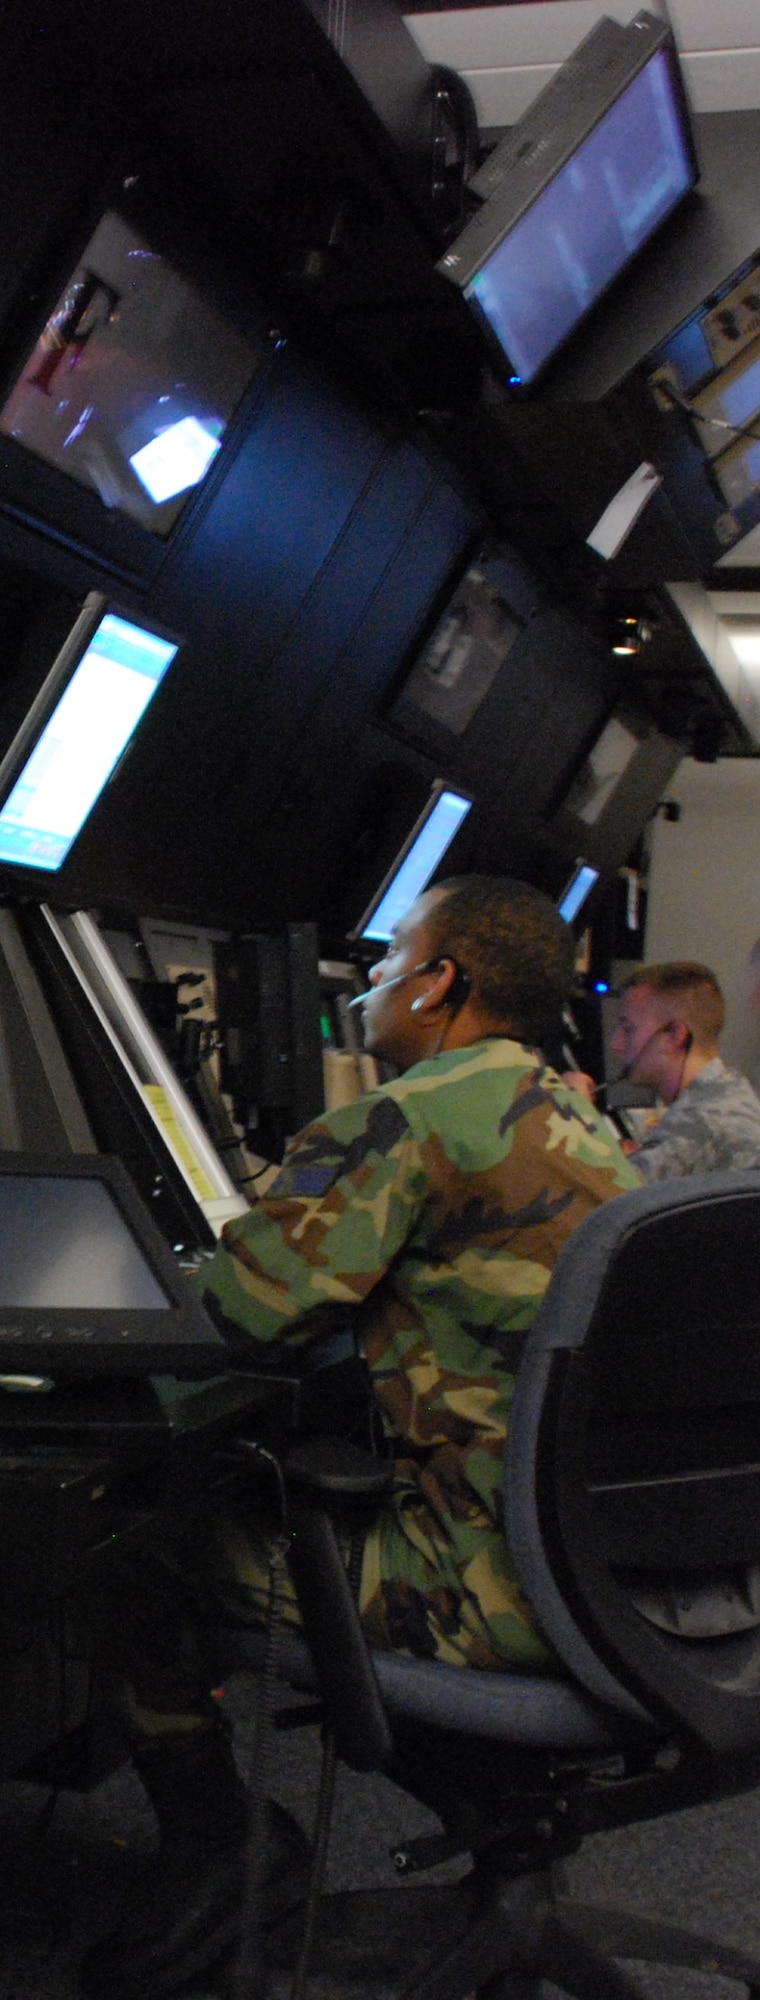 Senior Airman L’Aaron Odum, 80th Operations Support Squadron, is giving control instructions to multiple aircraft operating in the Military Operations Areas from the Radar Approach Control facility July 1. 